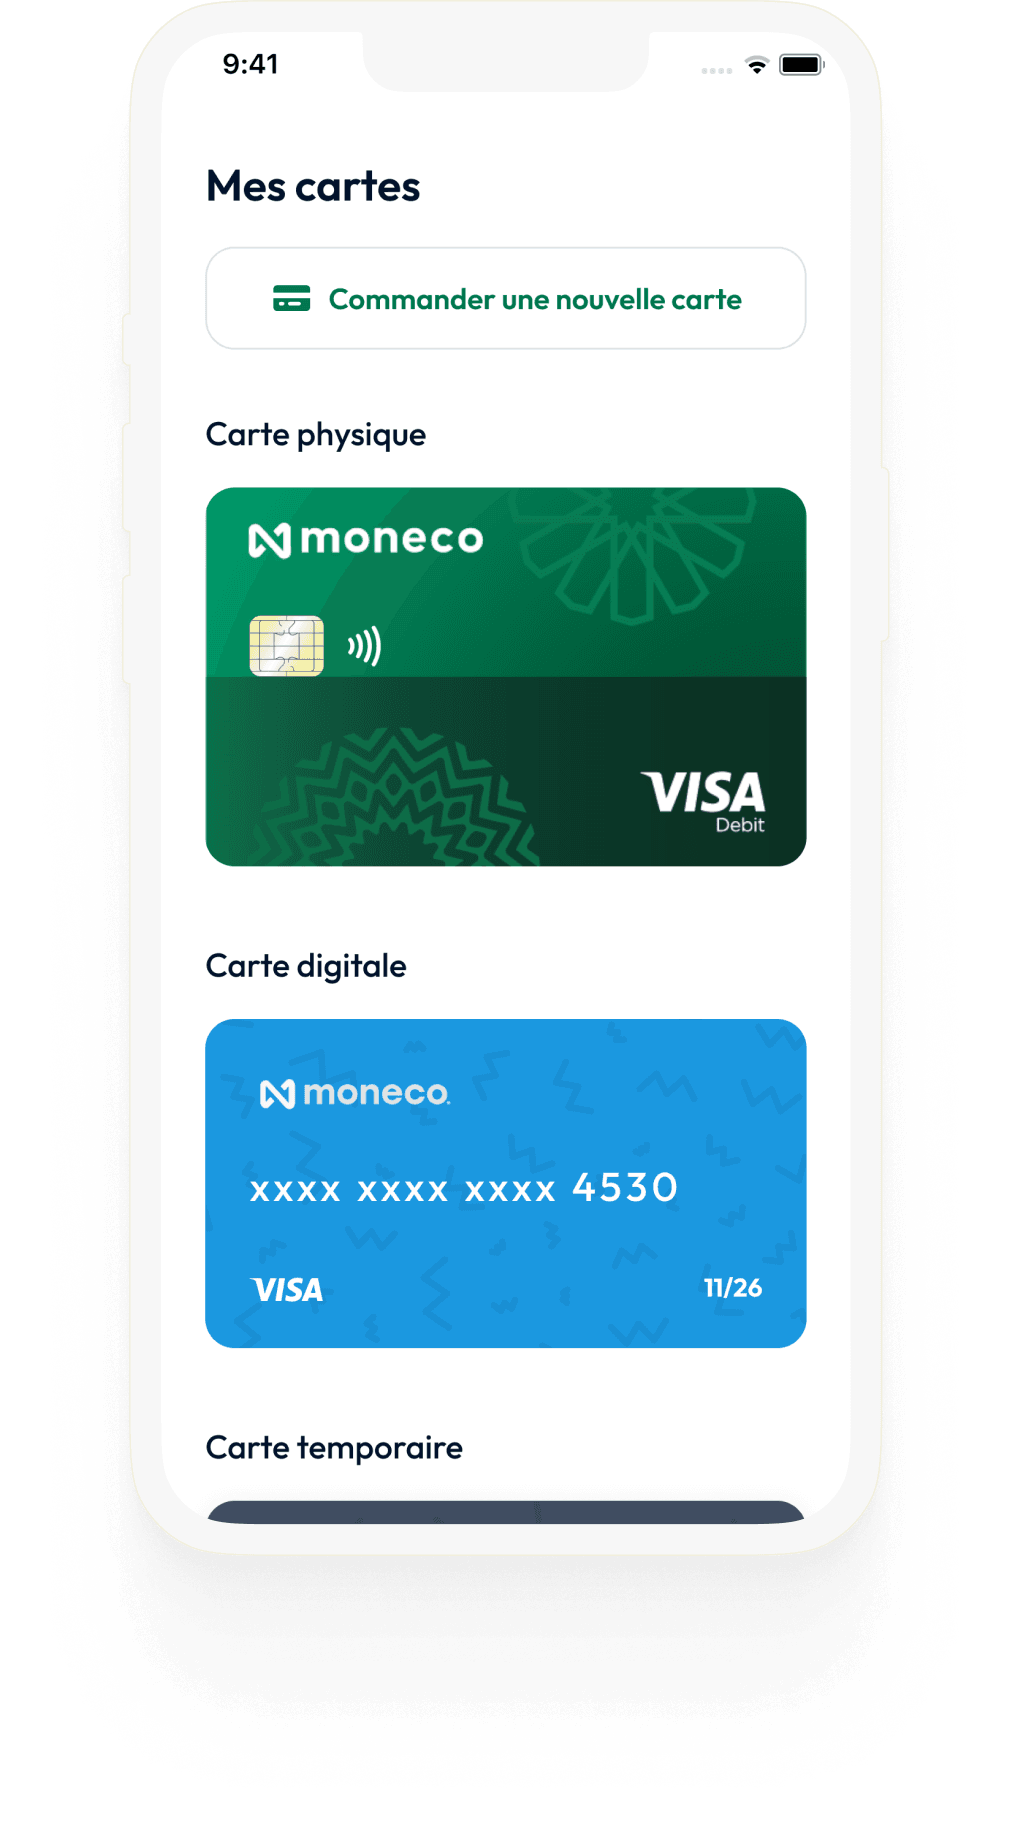 Visa Cards on iPhone